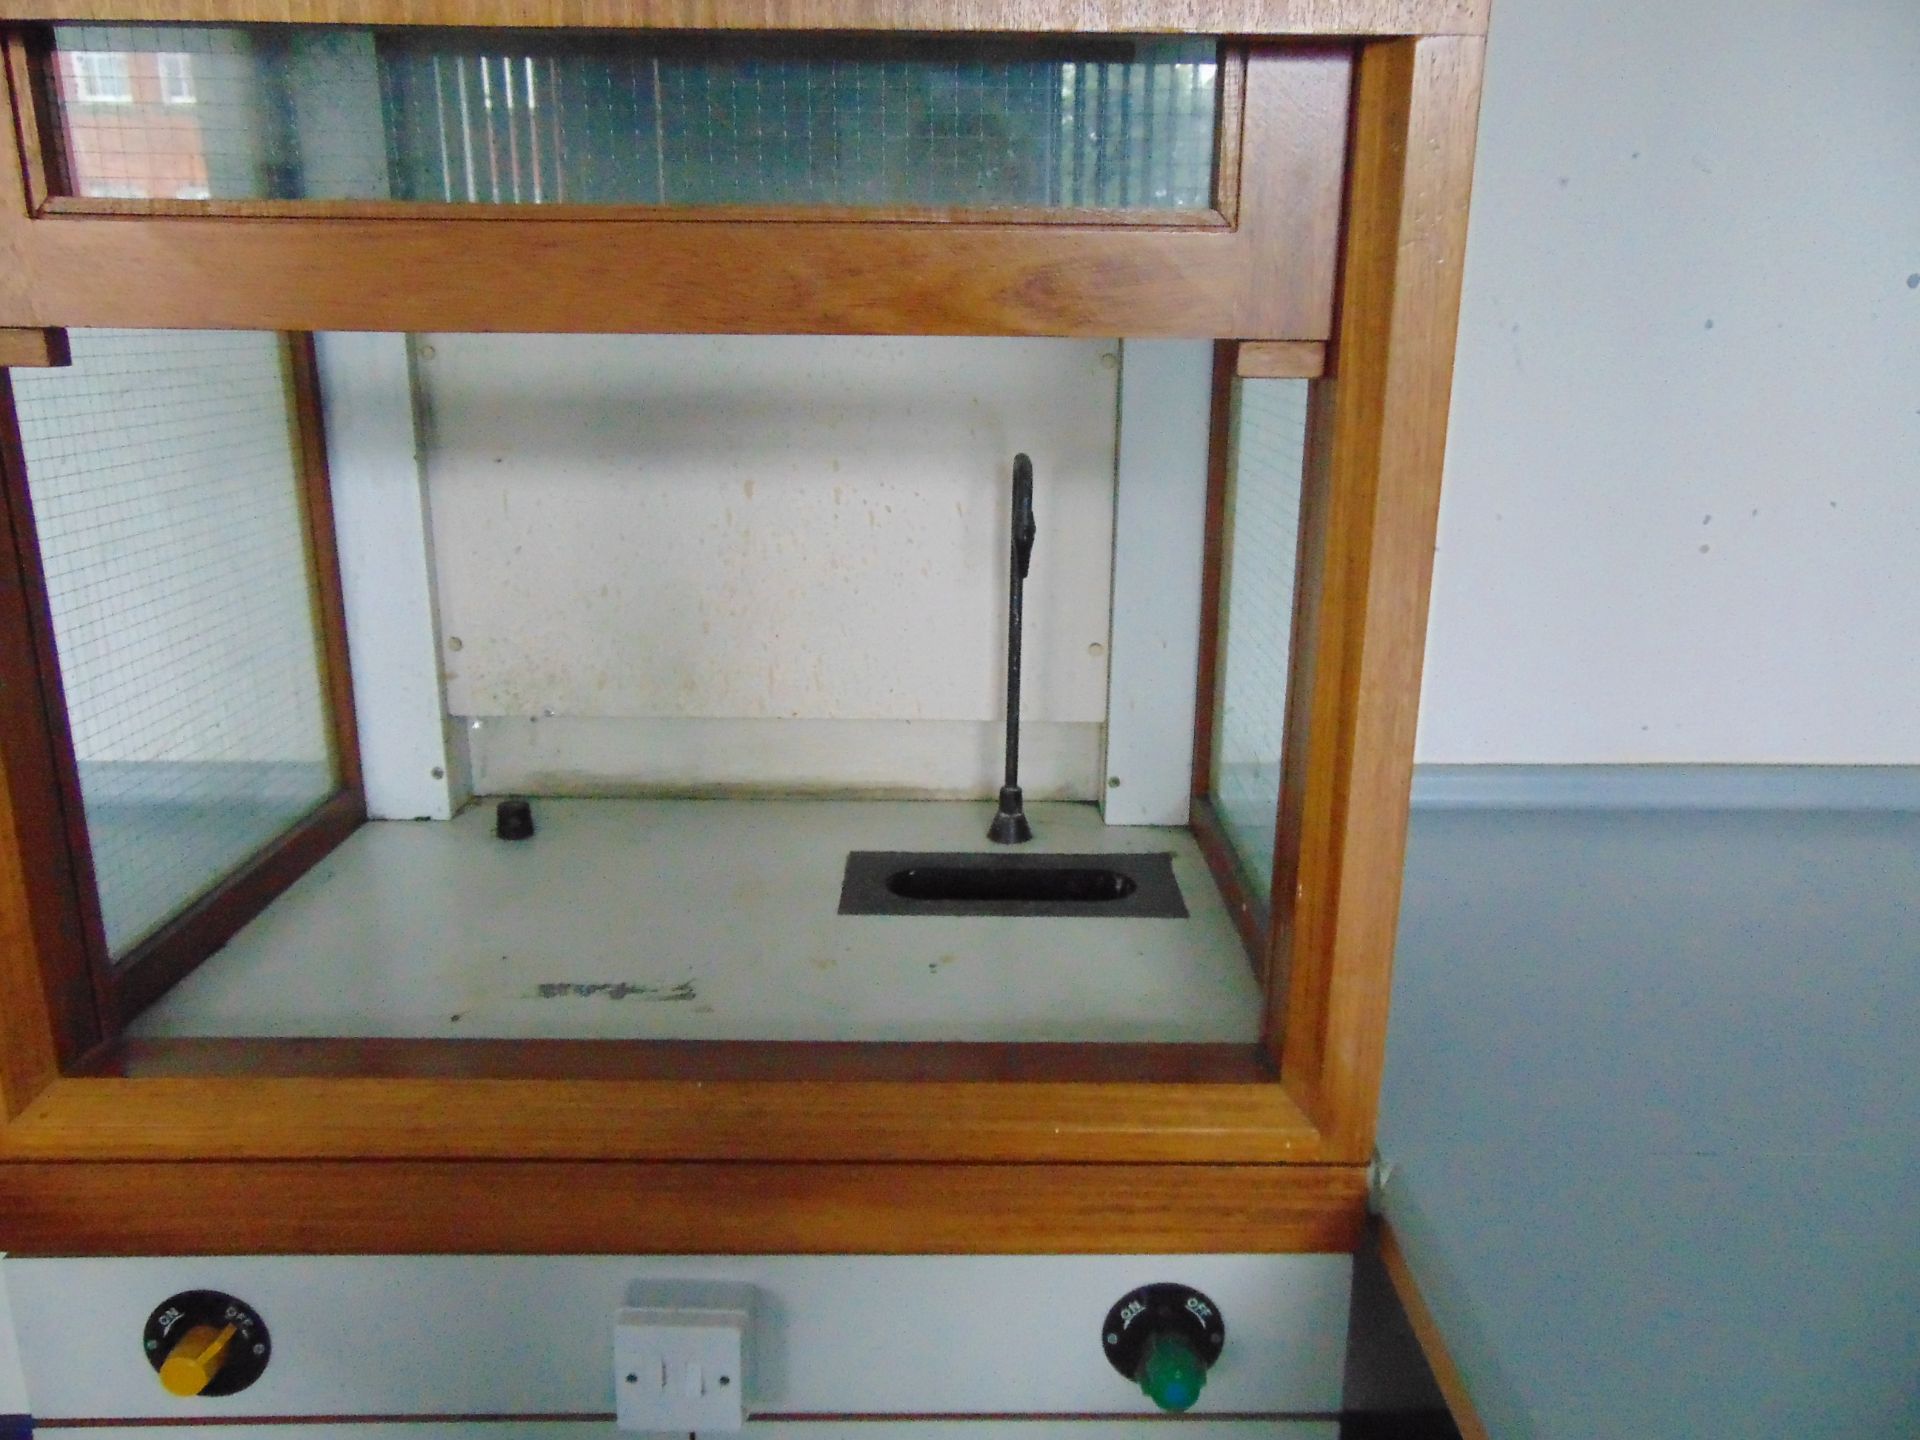 Fume Extraction Cabinet With Sink - Image 2 of 4